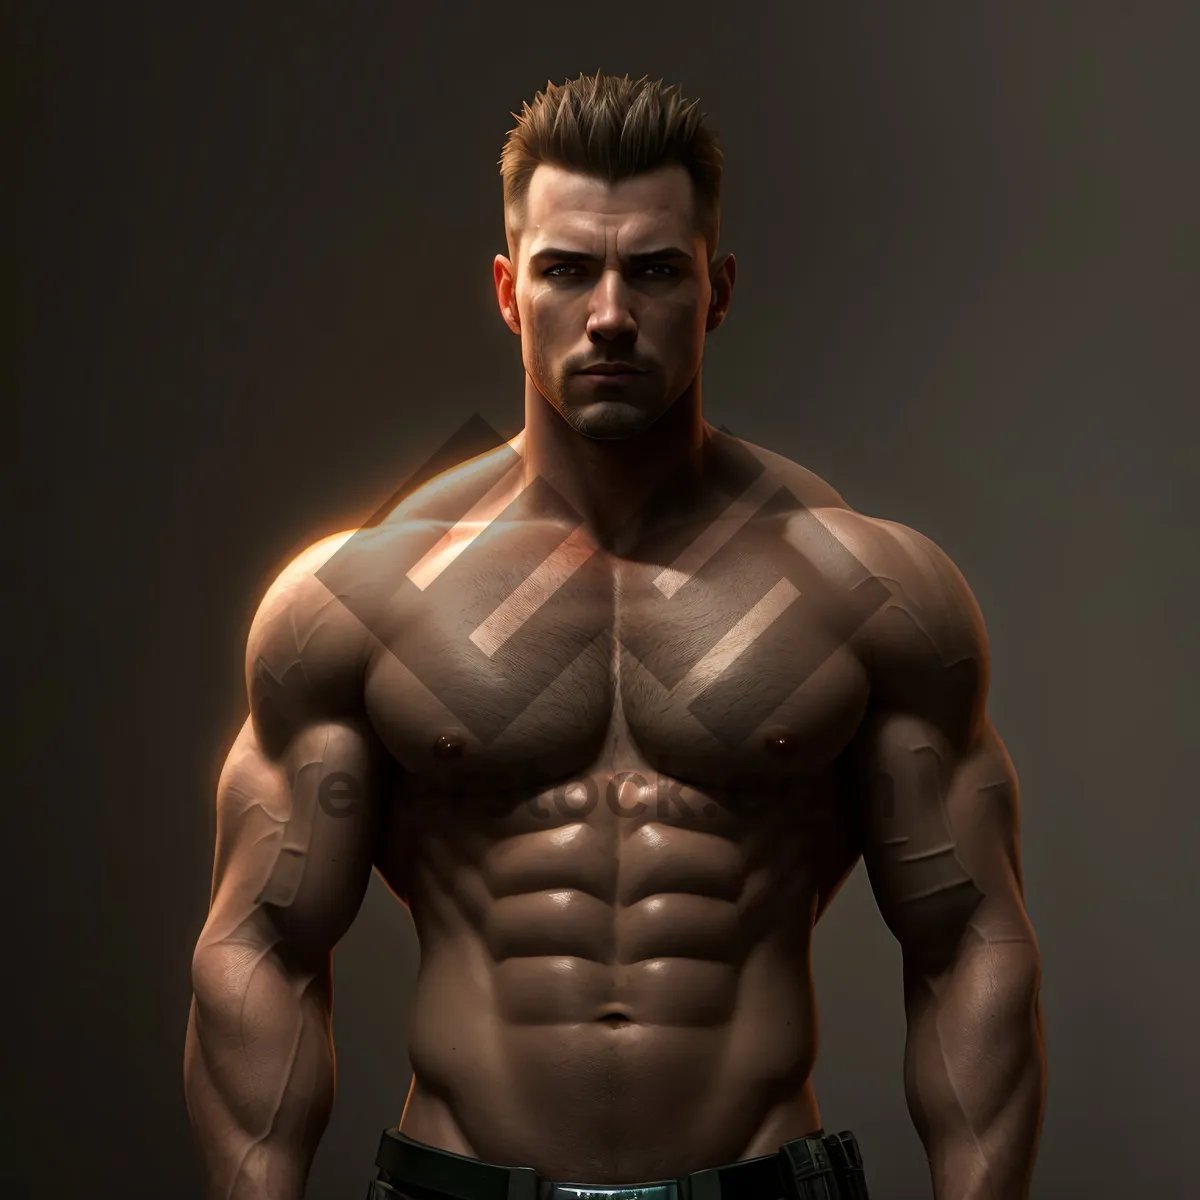 Picture of Powerful and Fit Male Athlete Posing Shirtless